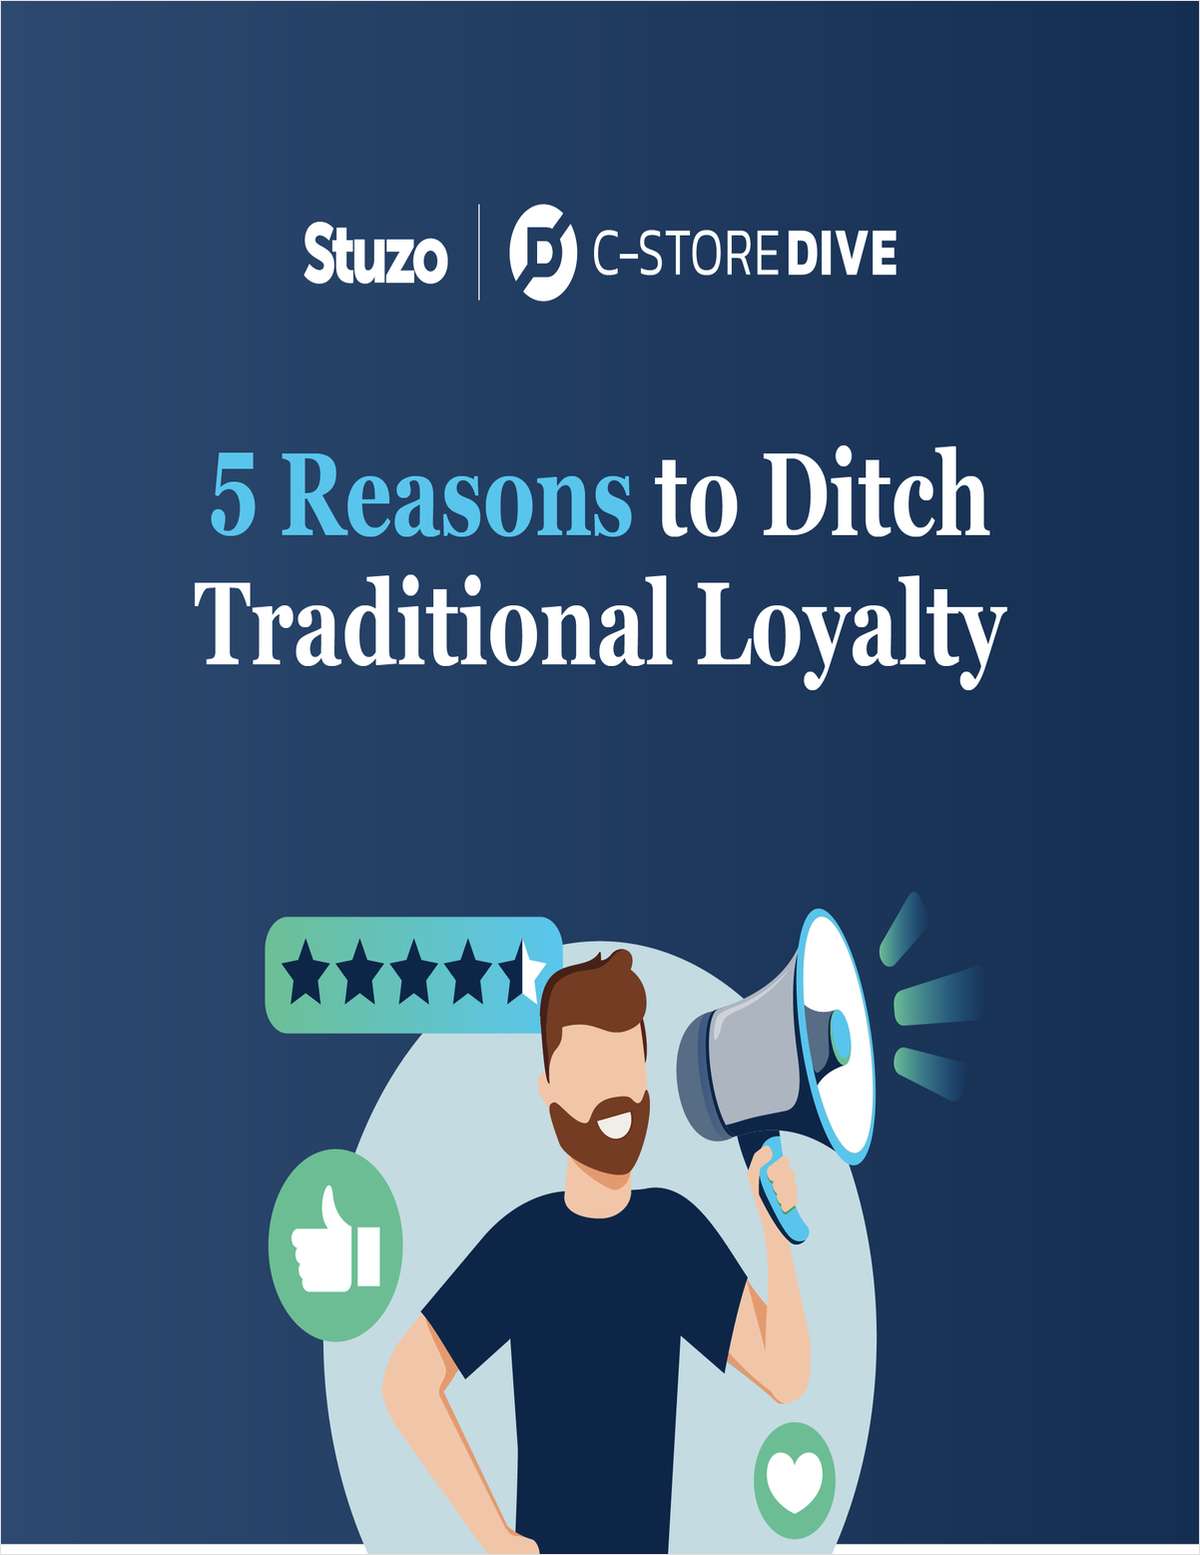 5 Reasons to Ditch Traditional Loyalty